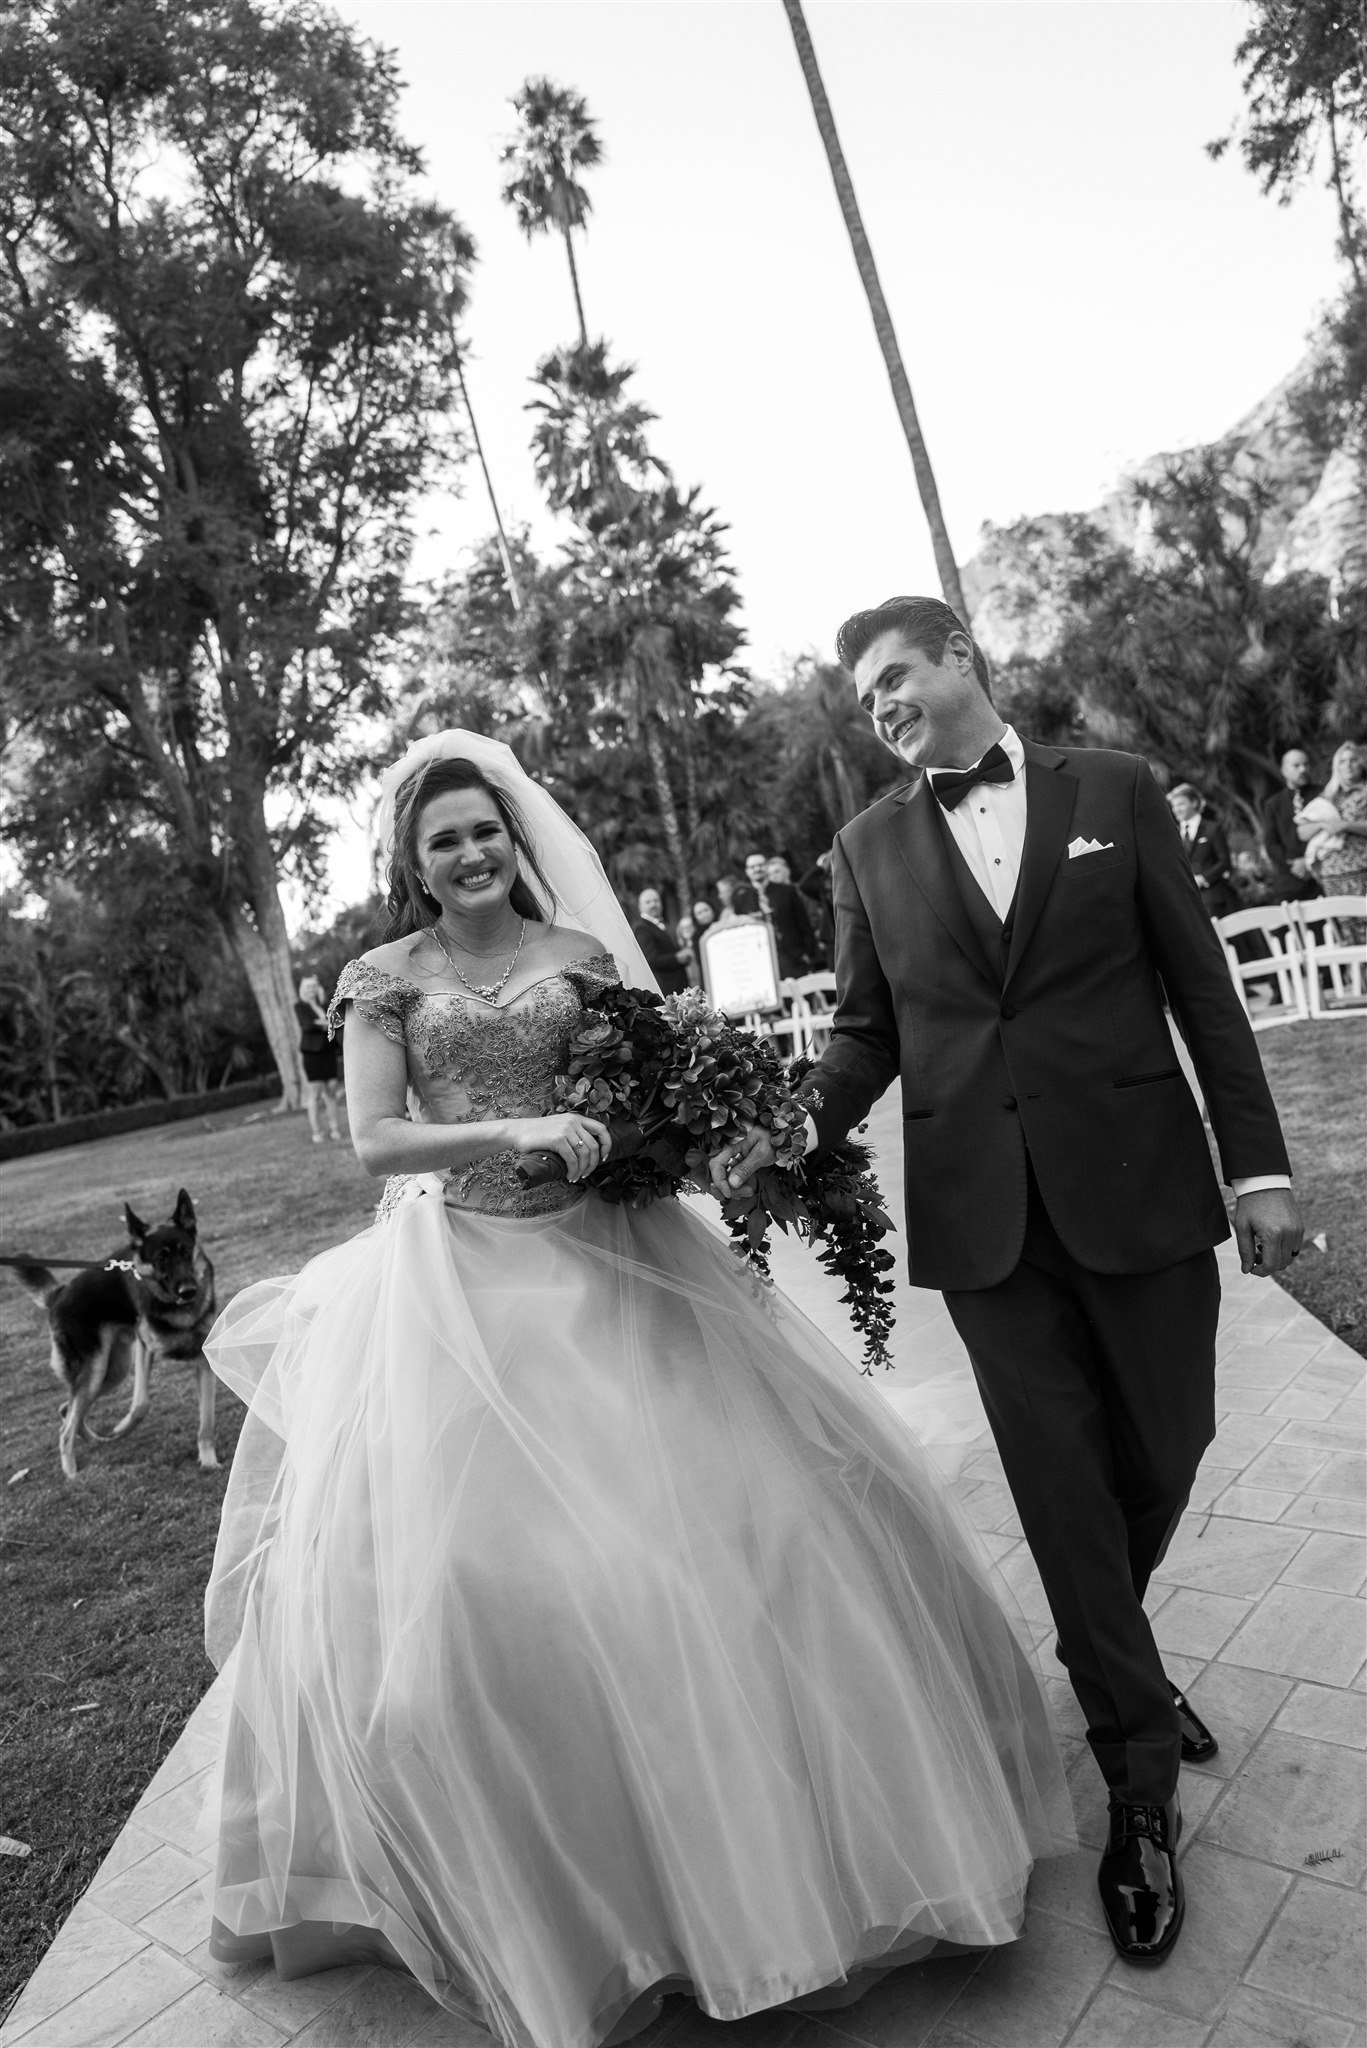 Wedding Ceremony at Newhall Mansion taken by Lulan Studio